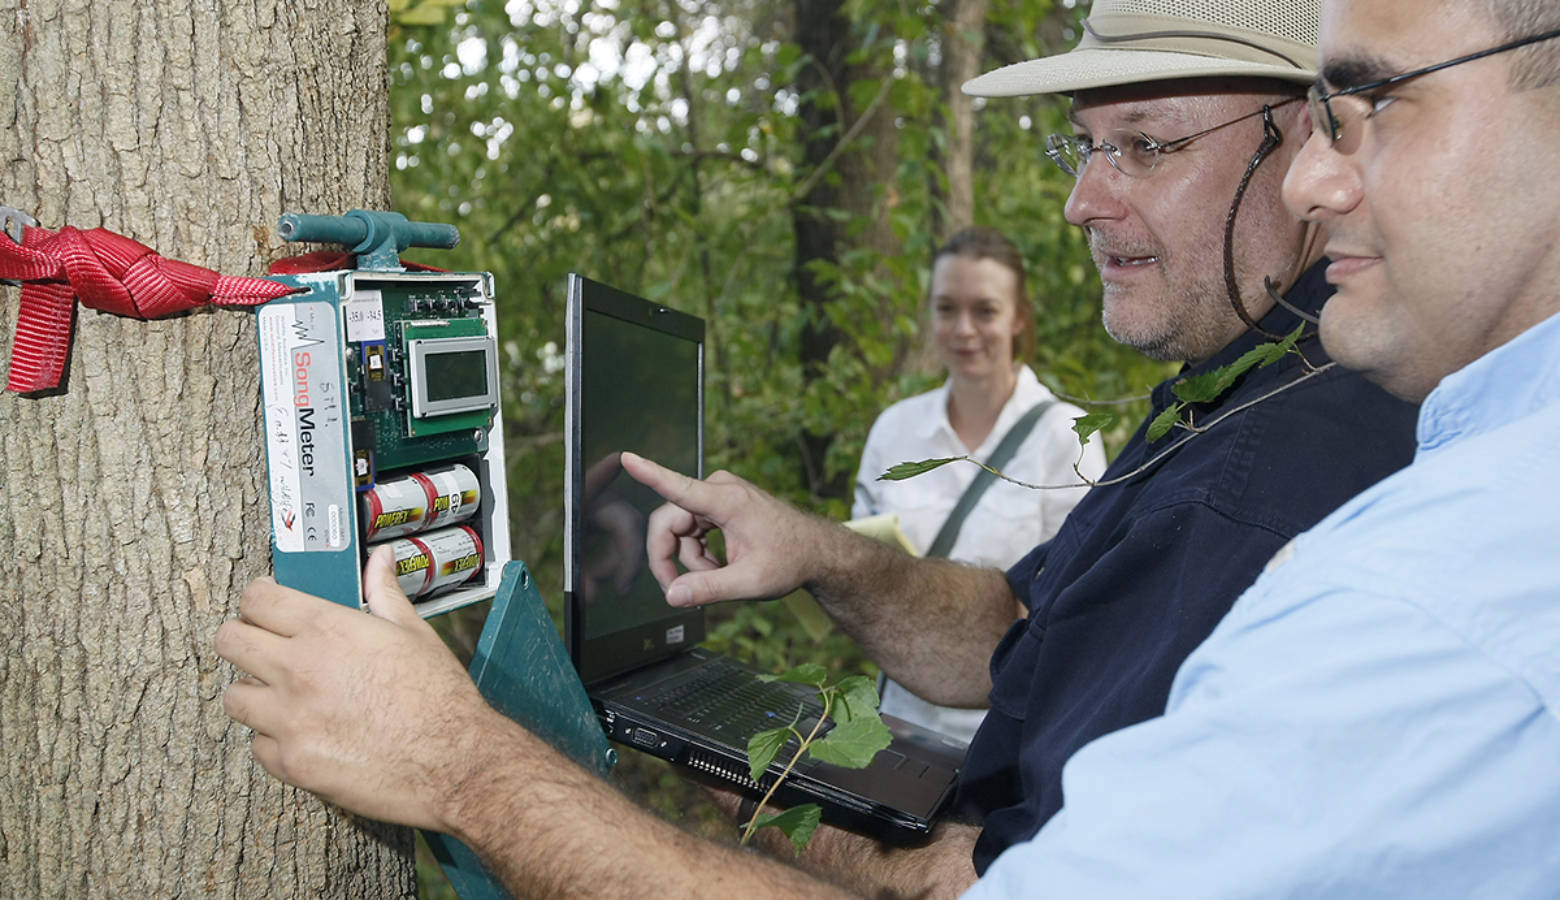 Purdue University ecologists collect data from recording equipment. (Purdue/Tom Campbell)